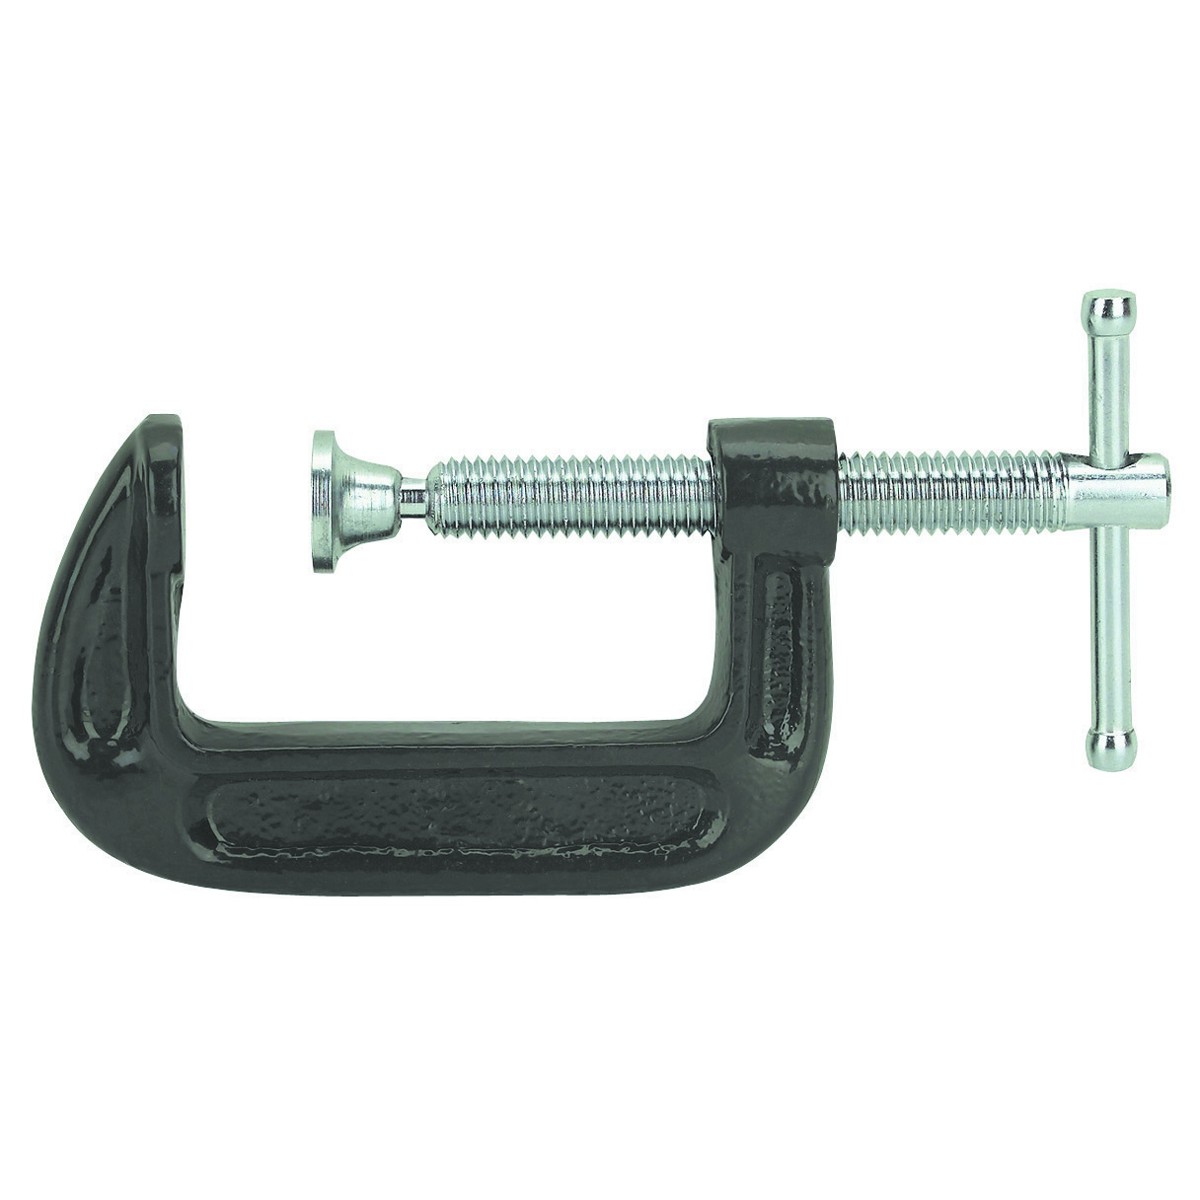 New   Pittsburgh  4 in. Industrial C-Clamp